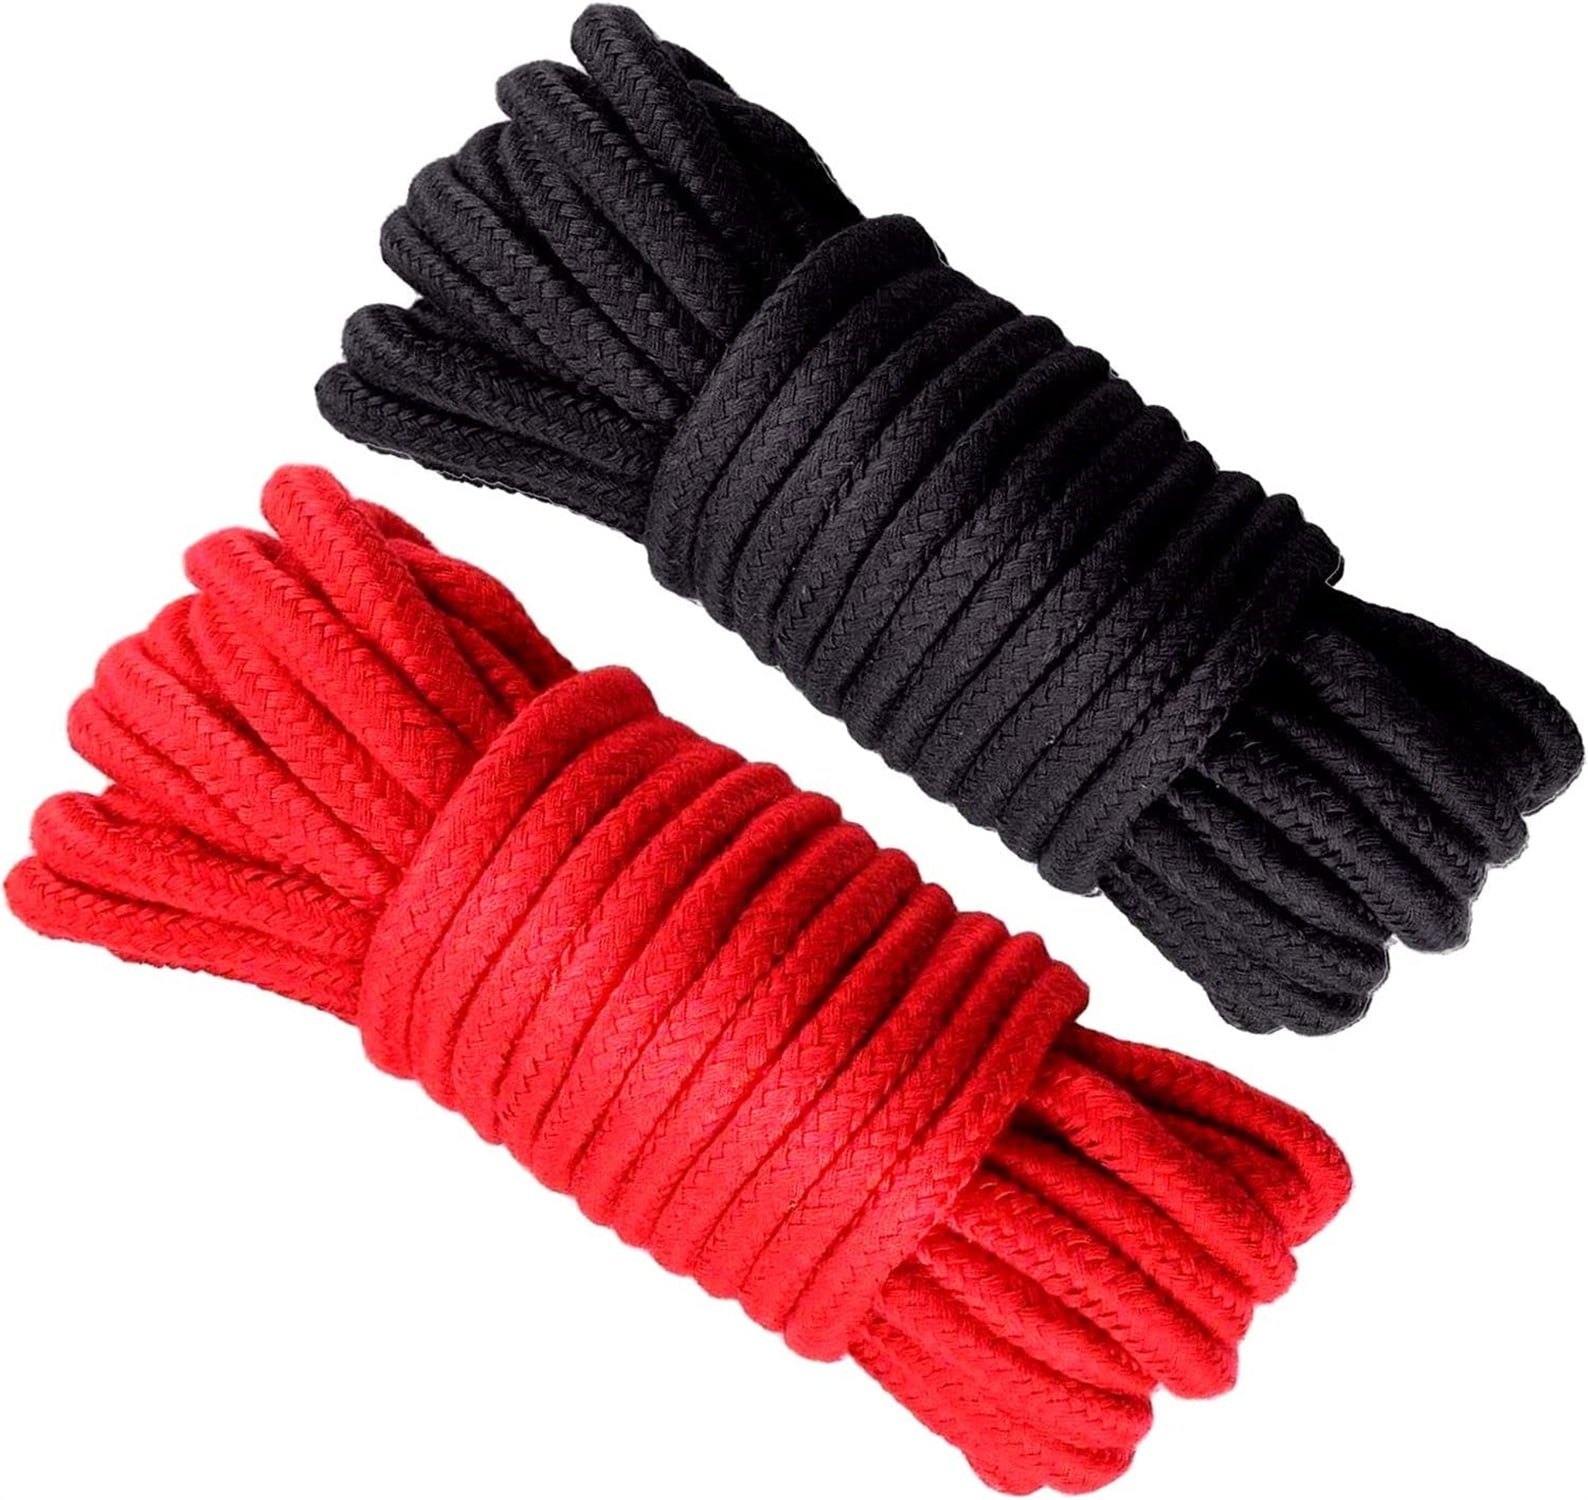 Soft Rope Cord,Casewin 2Pack Soft Cotton Rope 10 M/33 Feet 8 MM